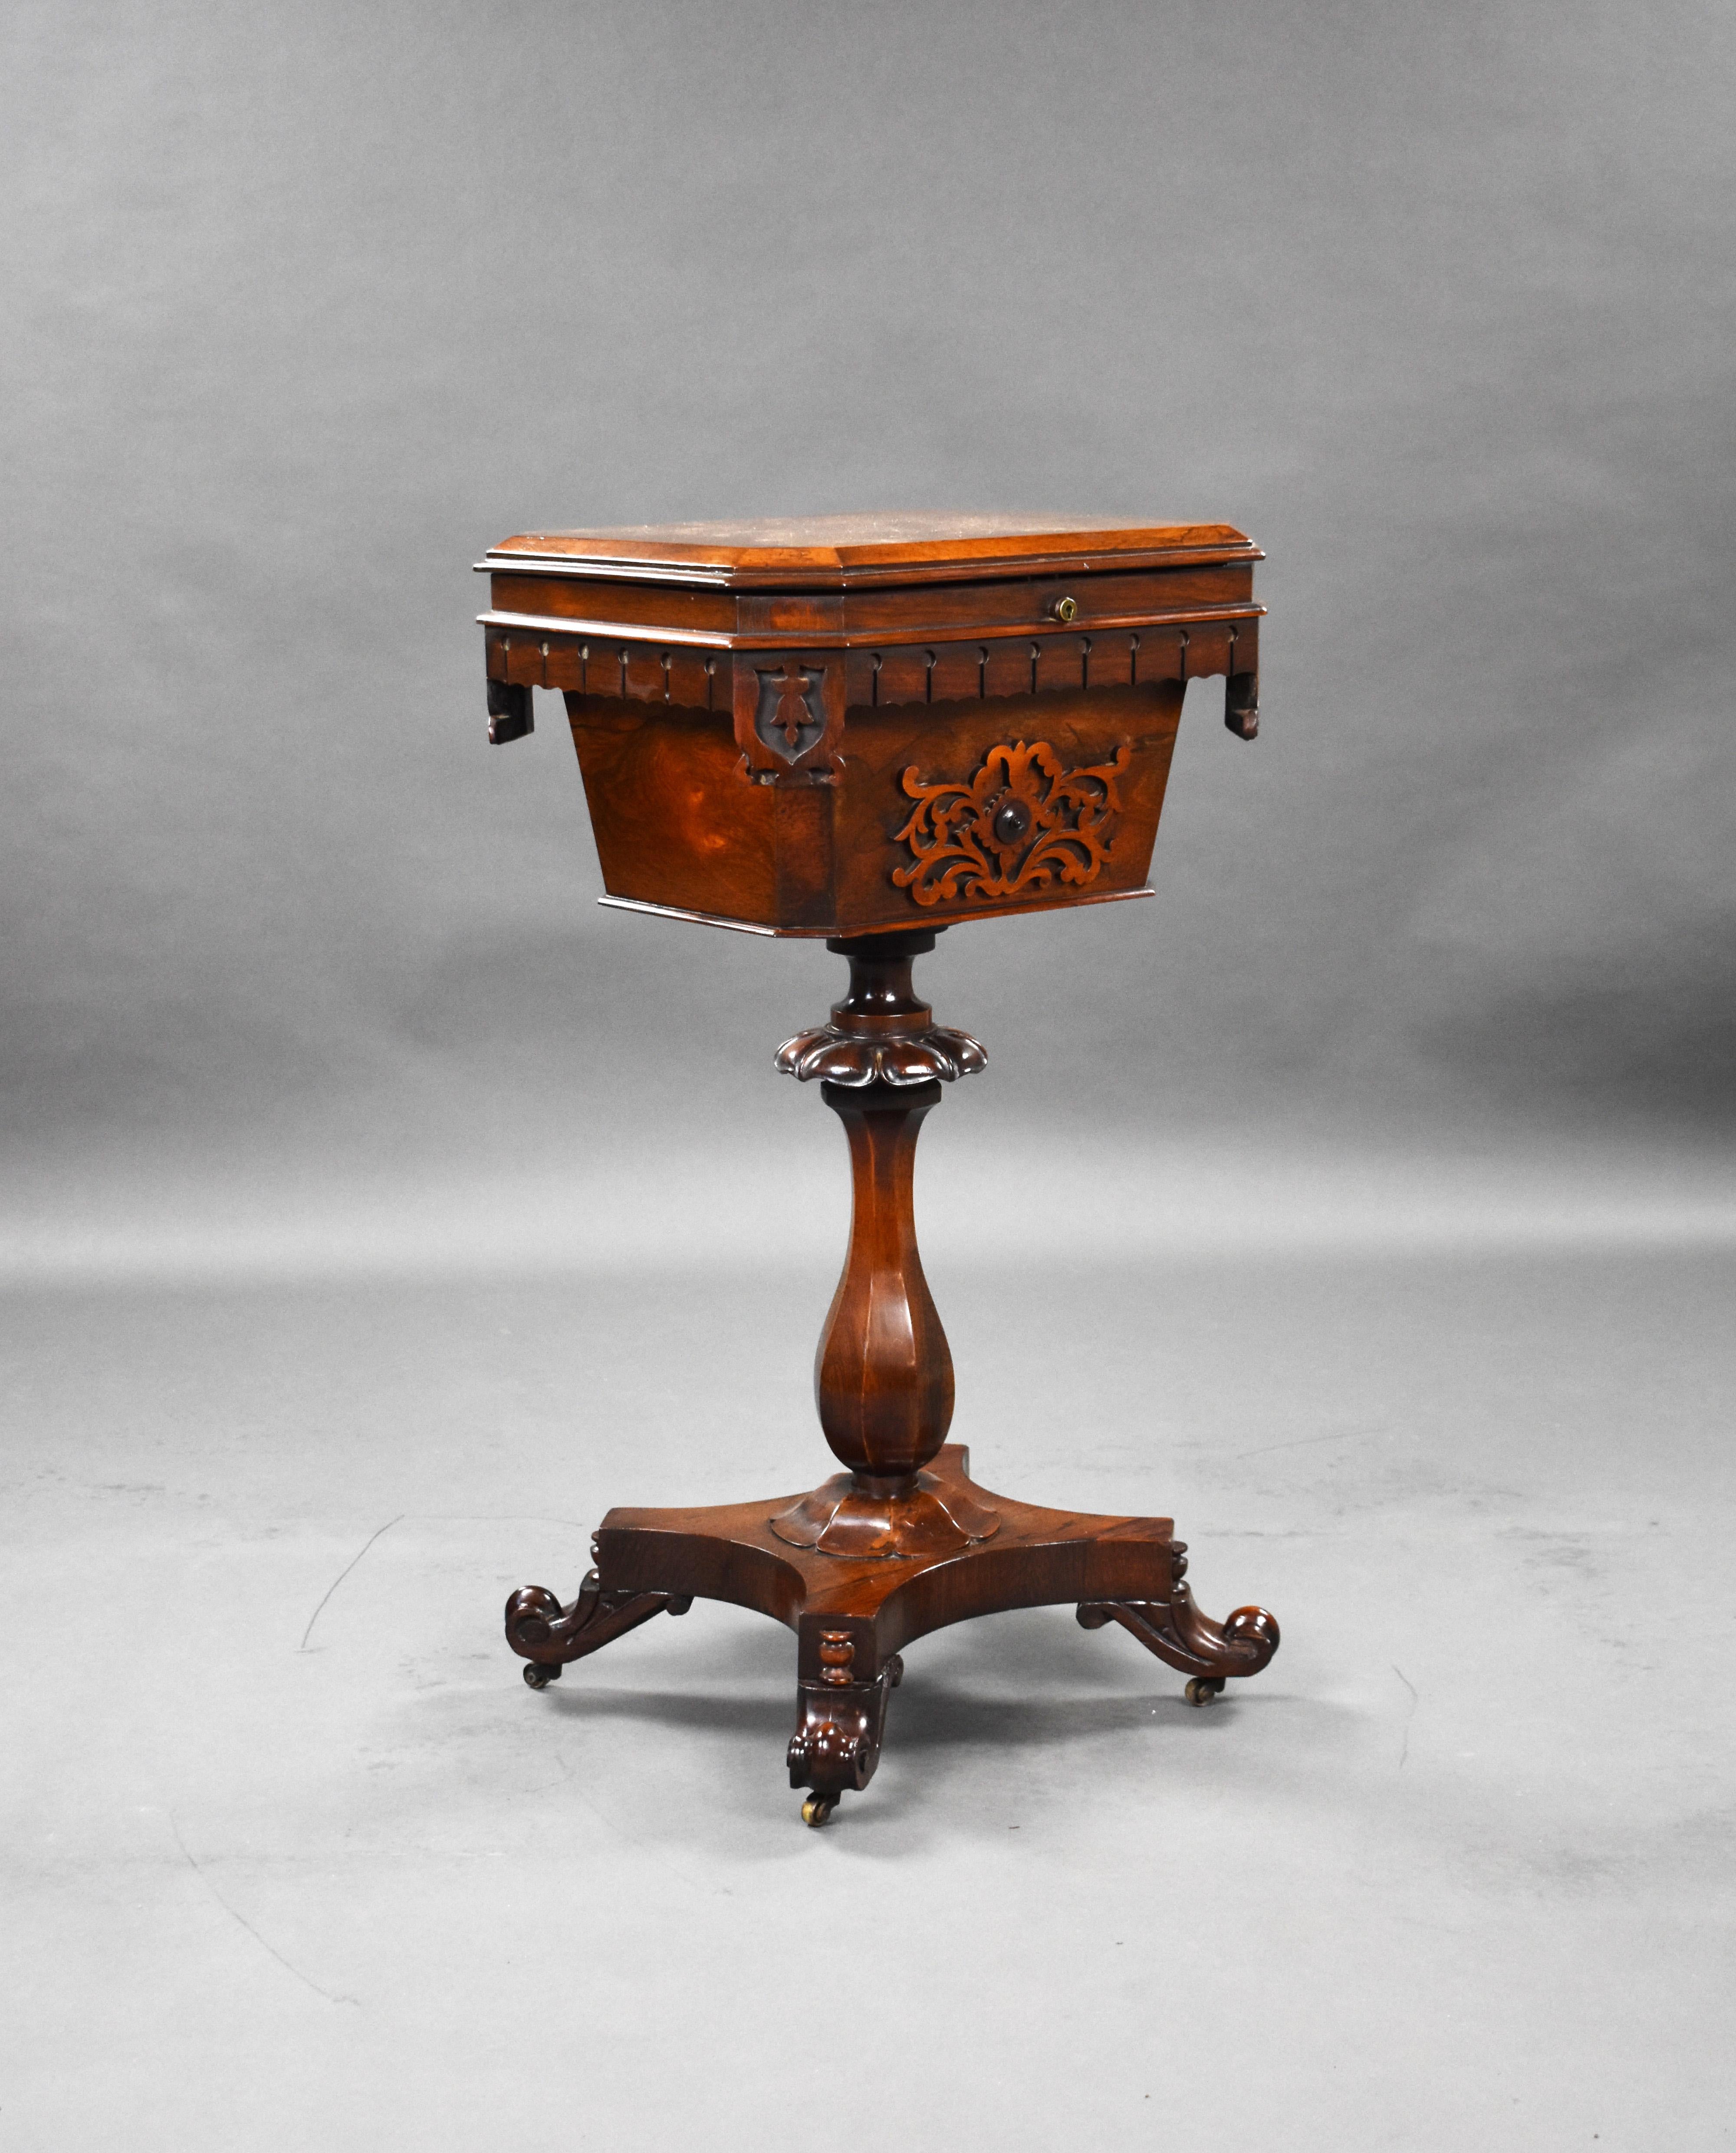 For sale is a good quality William IV rosewood tea poy, opening to a fitted interior retain its original glass bowls, above a turned stem over a platform base, standing on elegant feet raised on original castors. The tea poy remains in very good